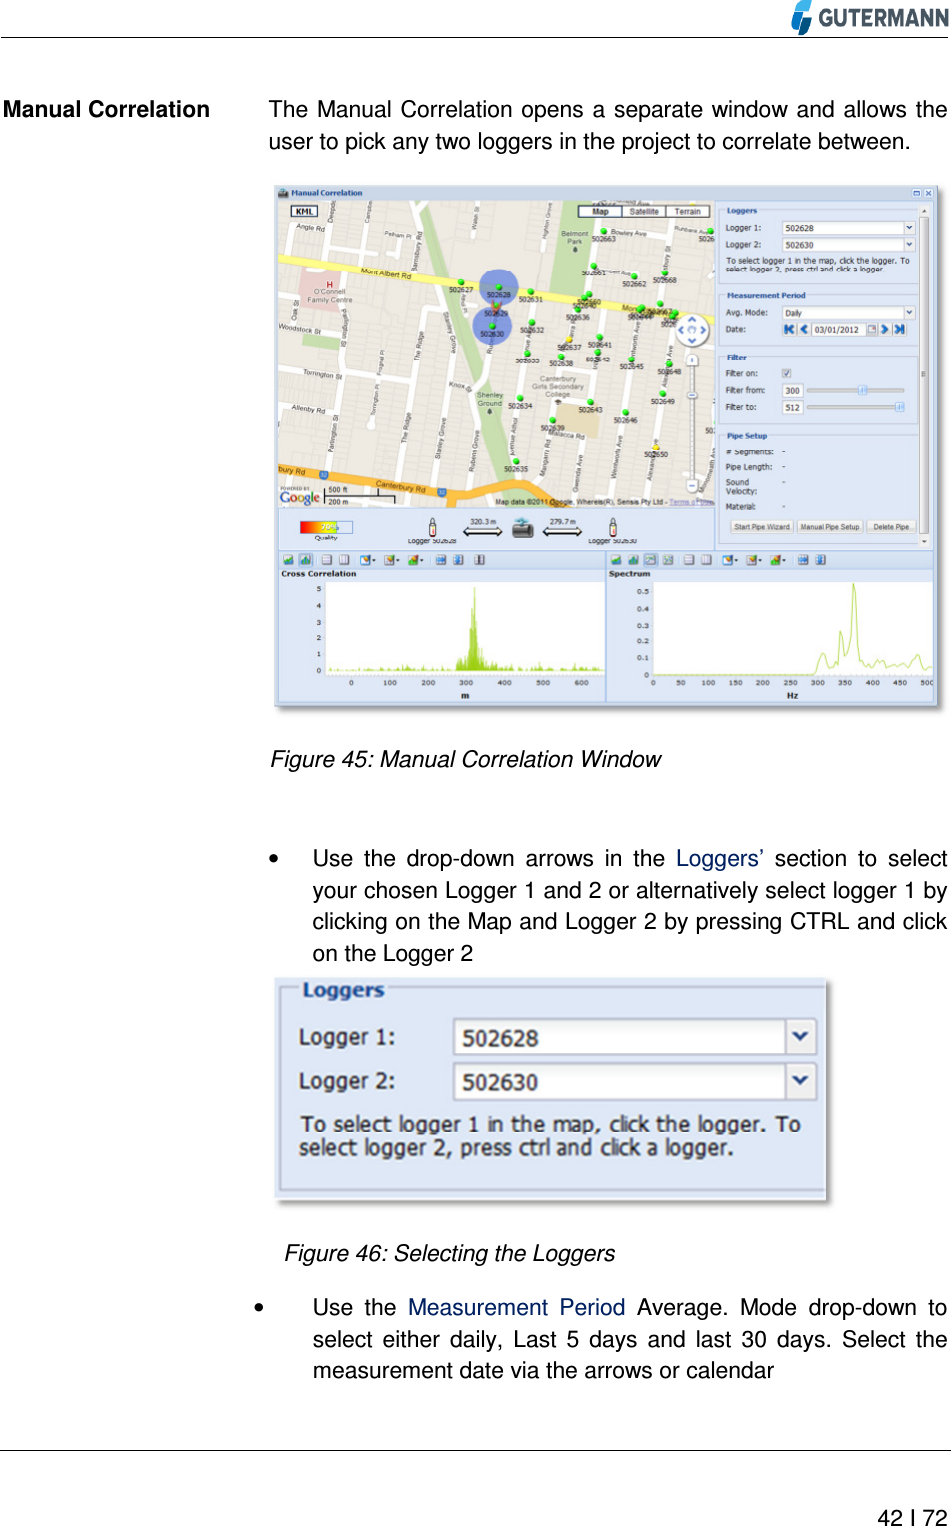          42 I 72  The Manual Correlation opens a separate window and allows the user to pick any two loggers in the project to correlate between.  Figure 45: Manual Correlation Window  •  Use  the  drop-down  arrows  in  the  Loggers’  section  to  select your chosen Logger 1 and 2 or alternatively select logger 1 by clicking on the Map and Logger 2 by pressing CTRL and click on the Logger 2  Figure 46: Selecting the Loggers    •  Use  the  Measurement  Period  Average.  Mode  drop-down  to select  either  daily,  Last  5  days  and  last  30  days.  Select  the measurement date via the arrows or calendar  Manual Correlation 